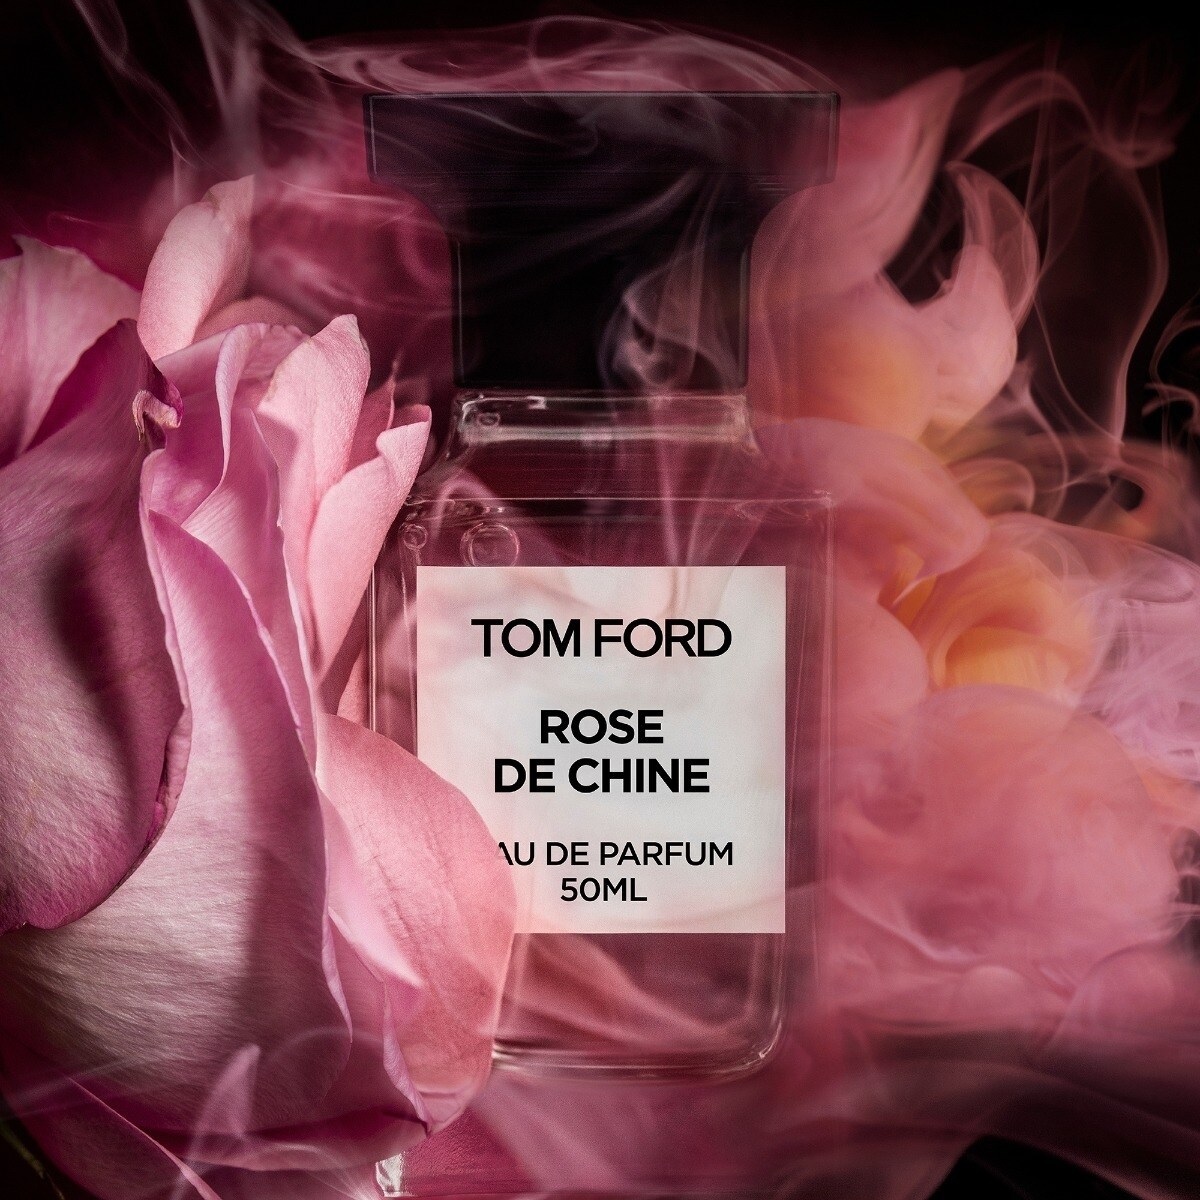 Down the garden path: Tom Ford's Private Rose Garden Collection